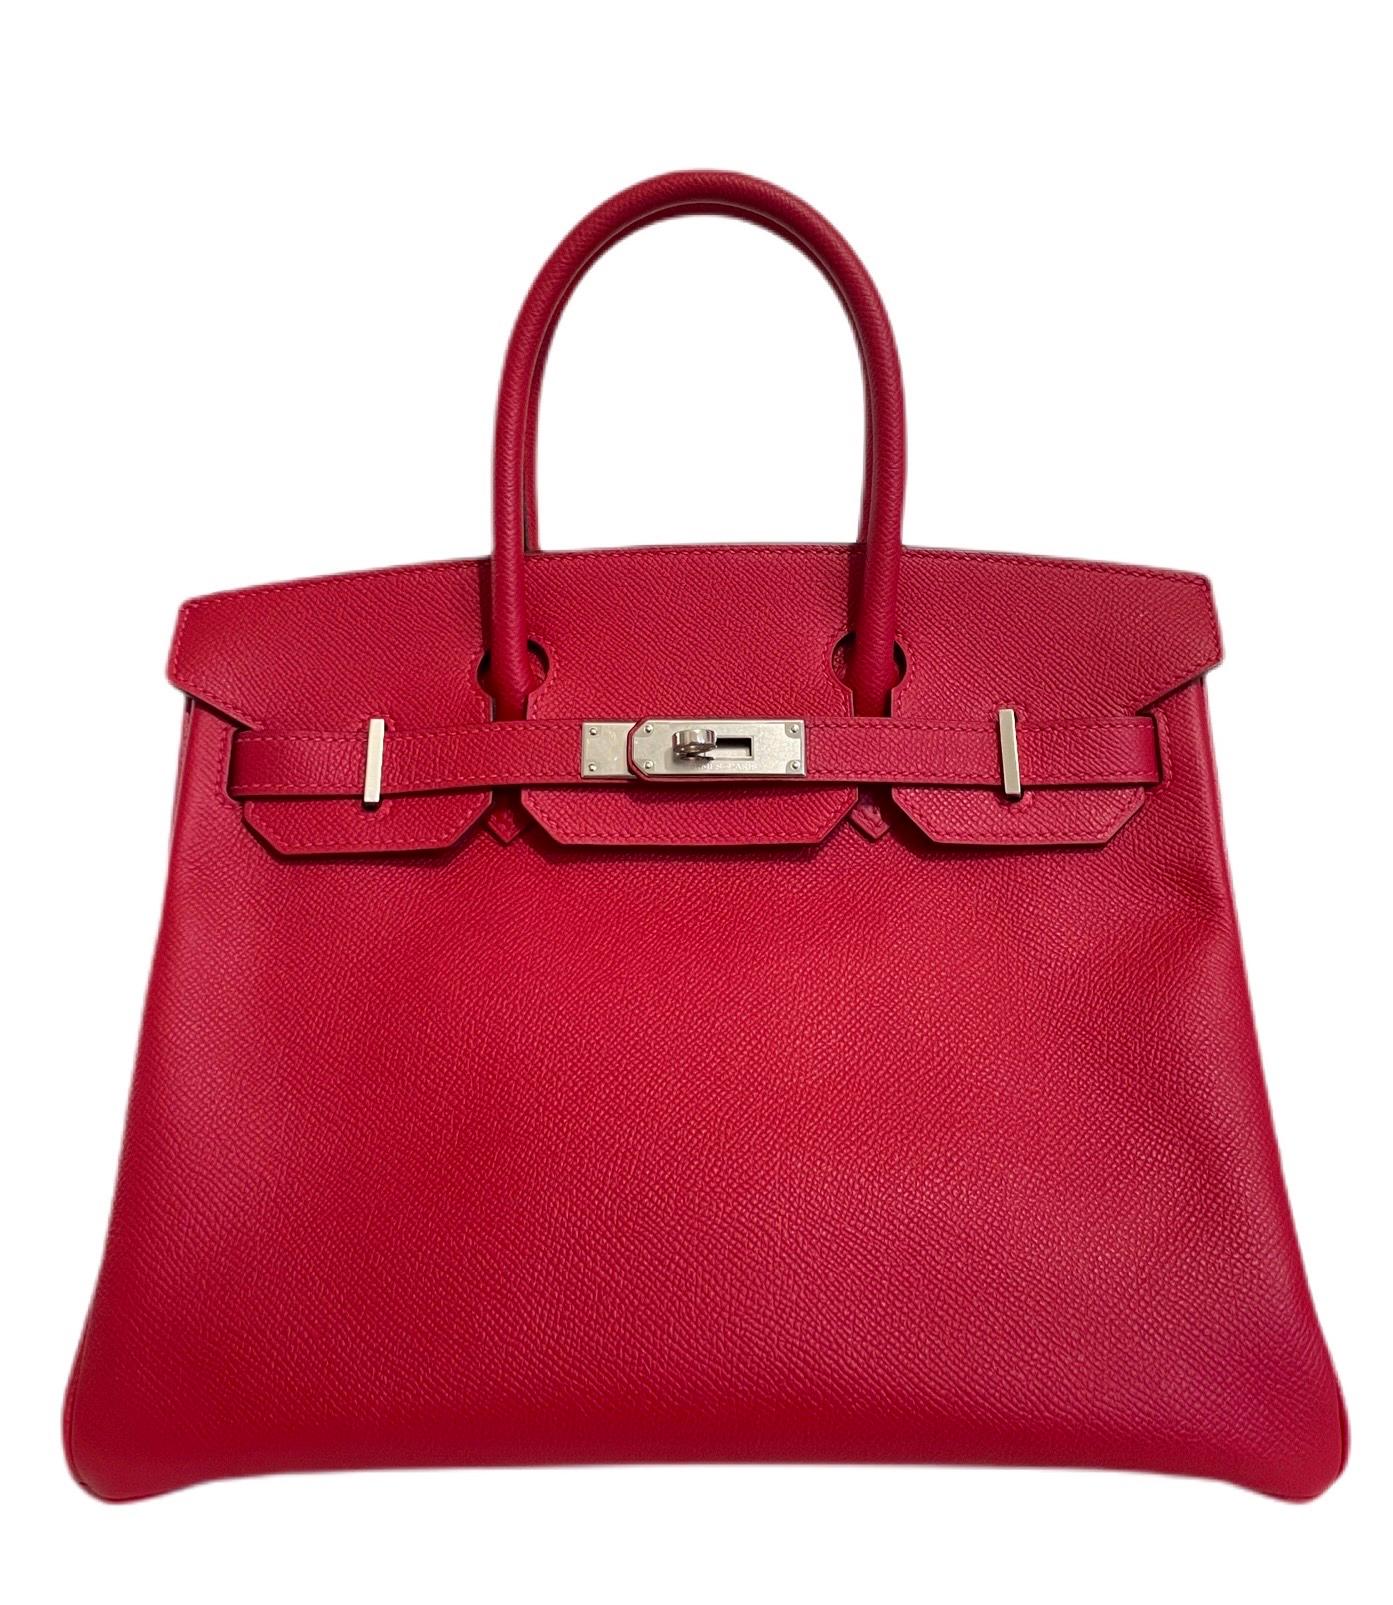 Stunning Hermes Birkin 30 Rouge Casaque Red Epsom Leather Palladium Hardware. Excellent Pristine condition, plastic on hardware. Excellent corners and structure. 

Shop with Confidence from Lux Addicts. Authenticity Guaranteed! 